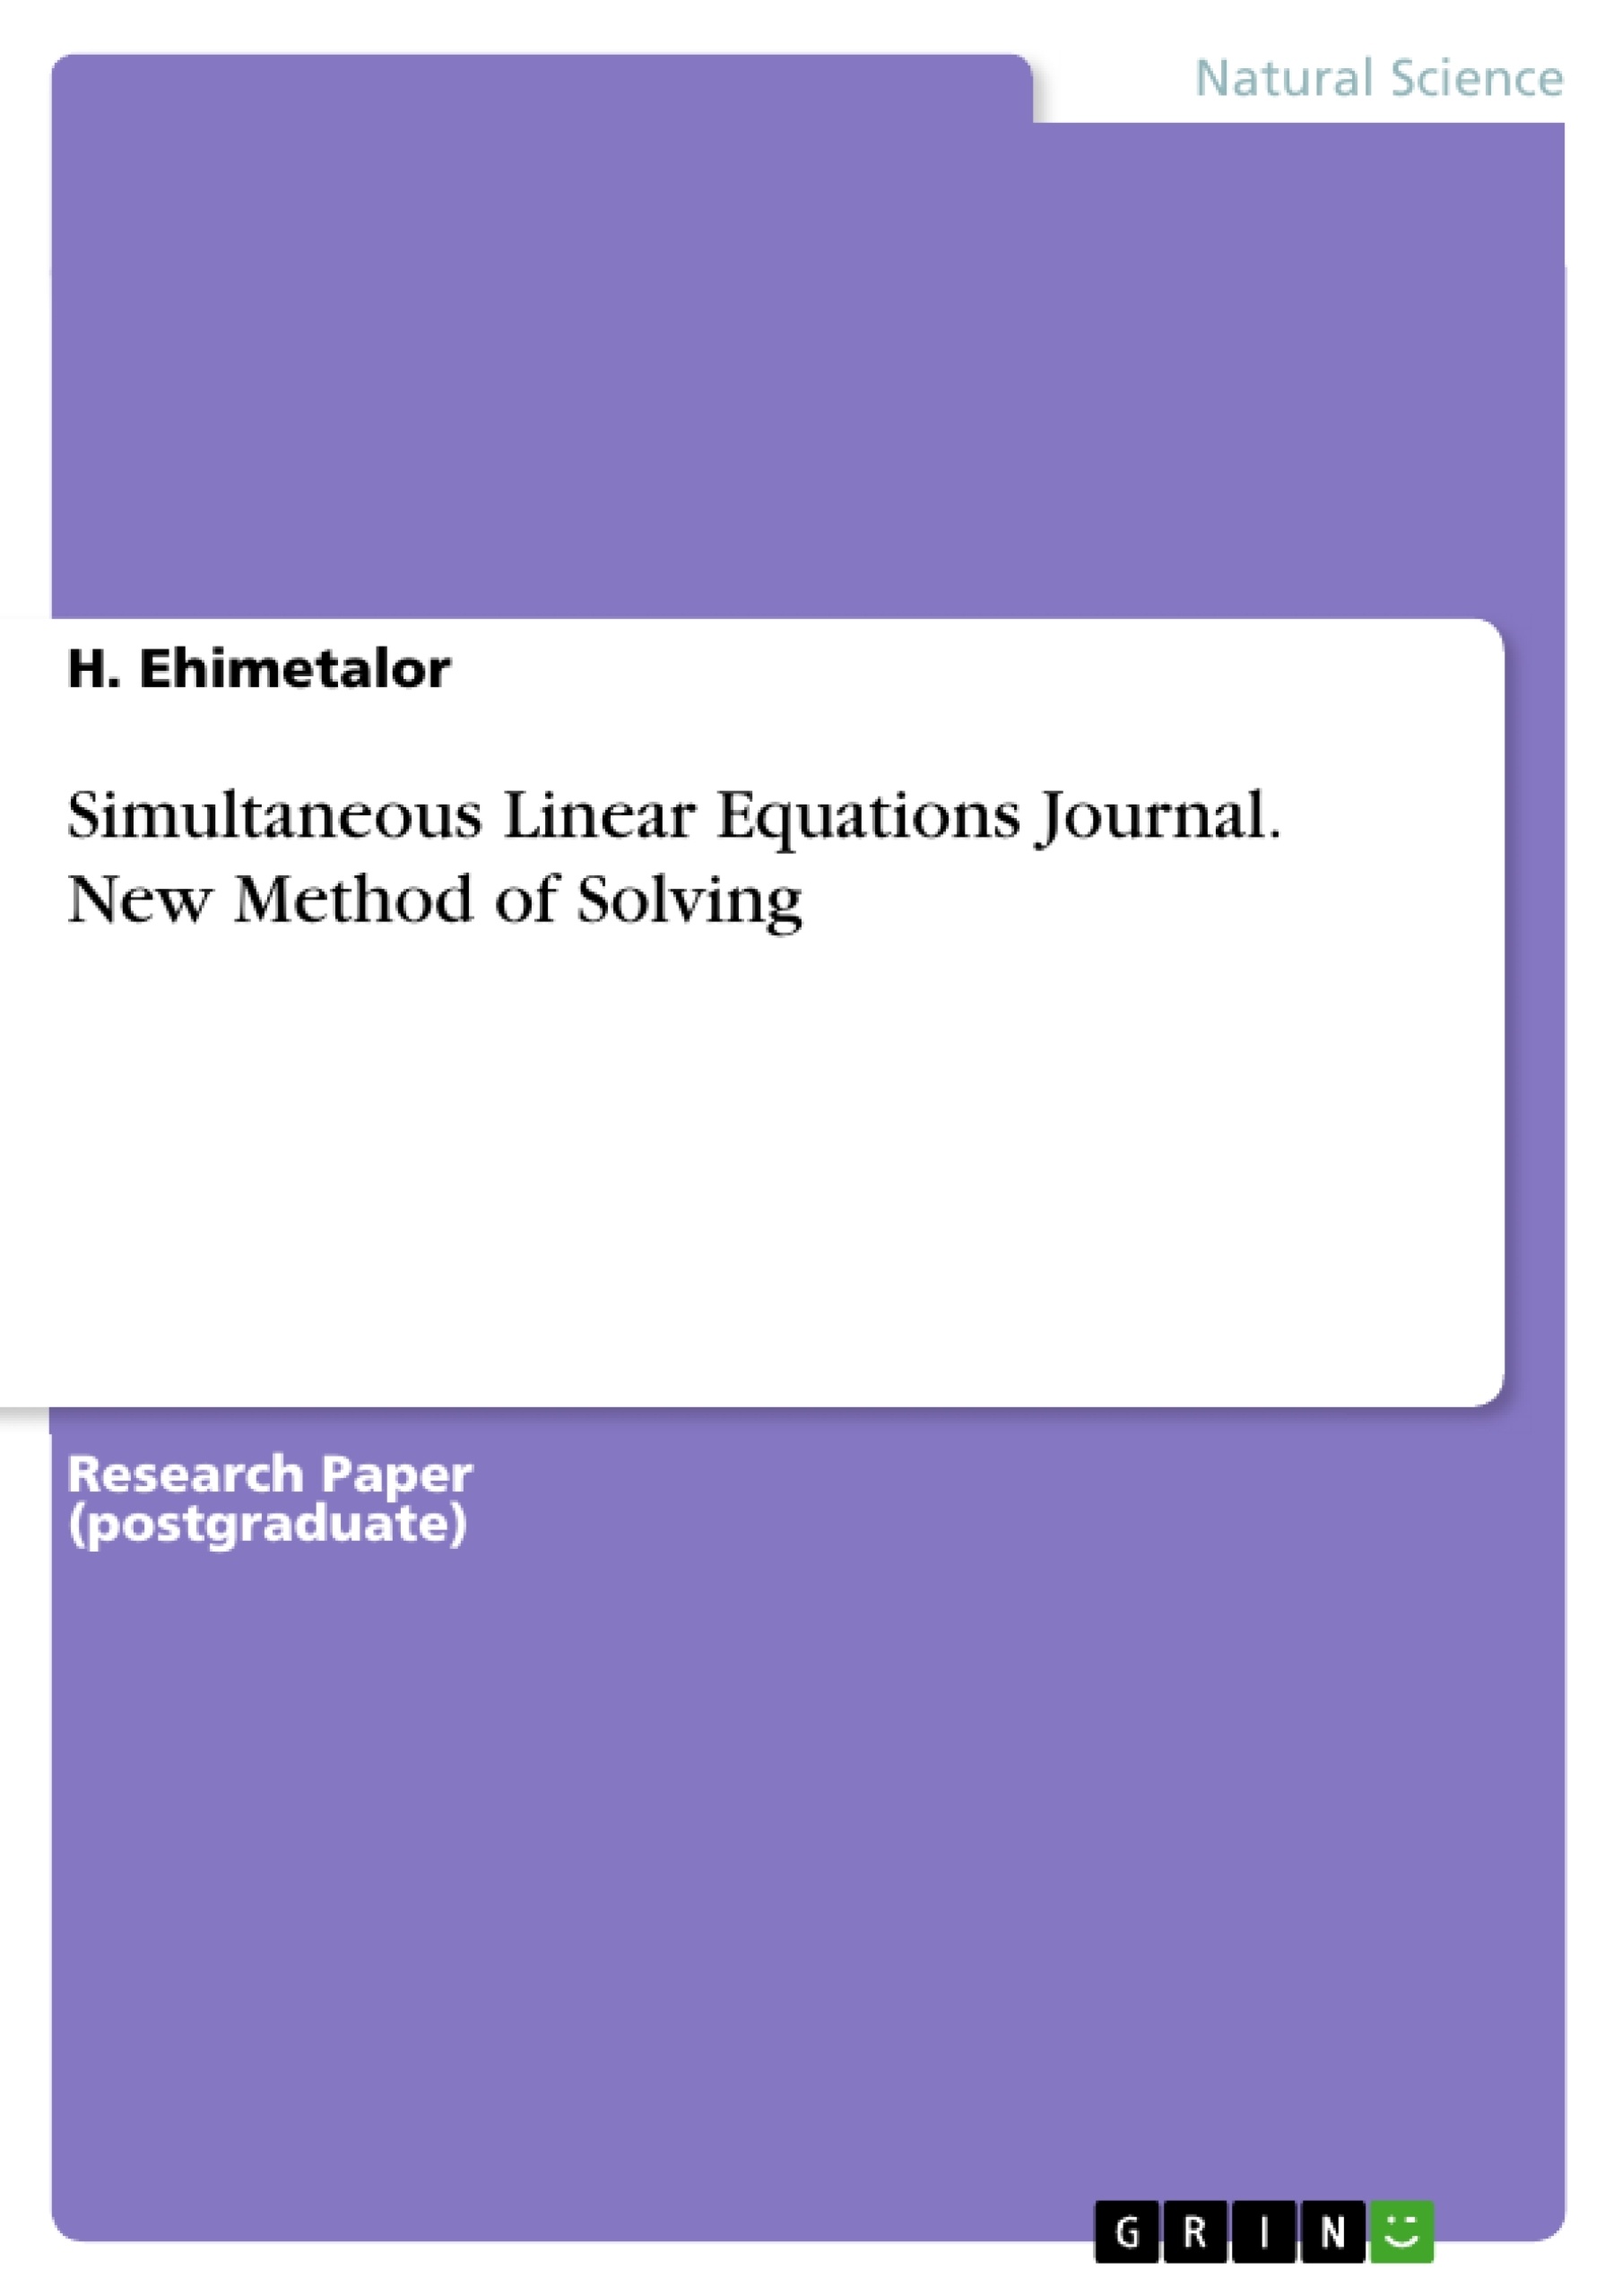 Title: Simultaneous Linear Equations Journal. New Method of Solving